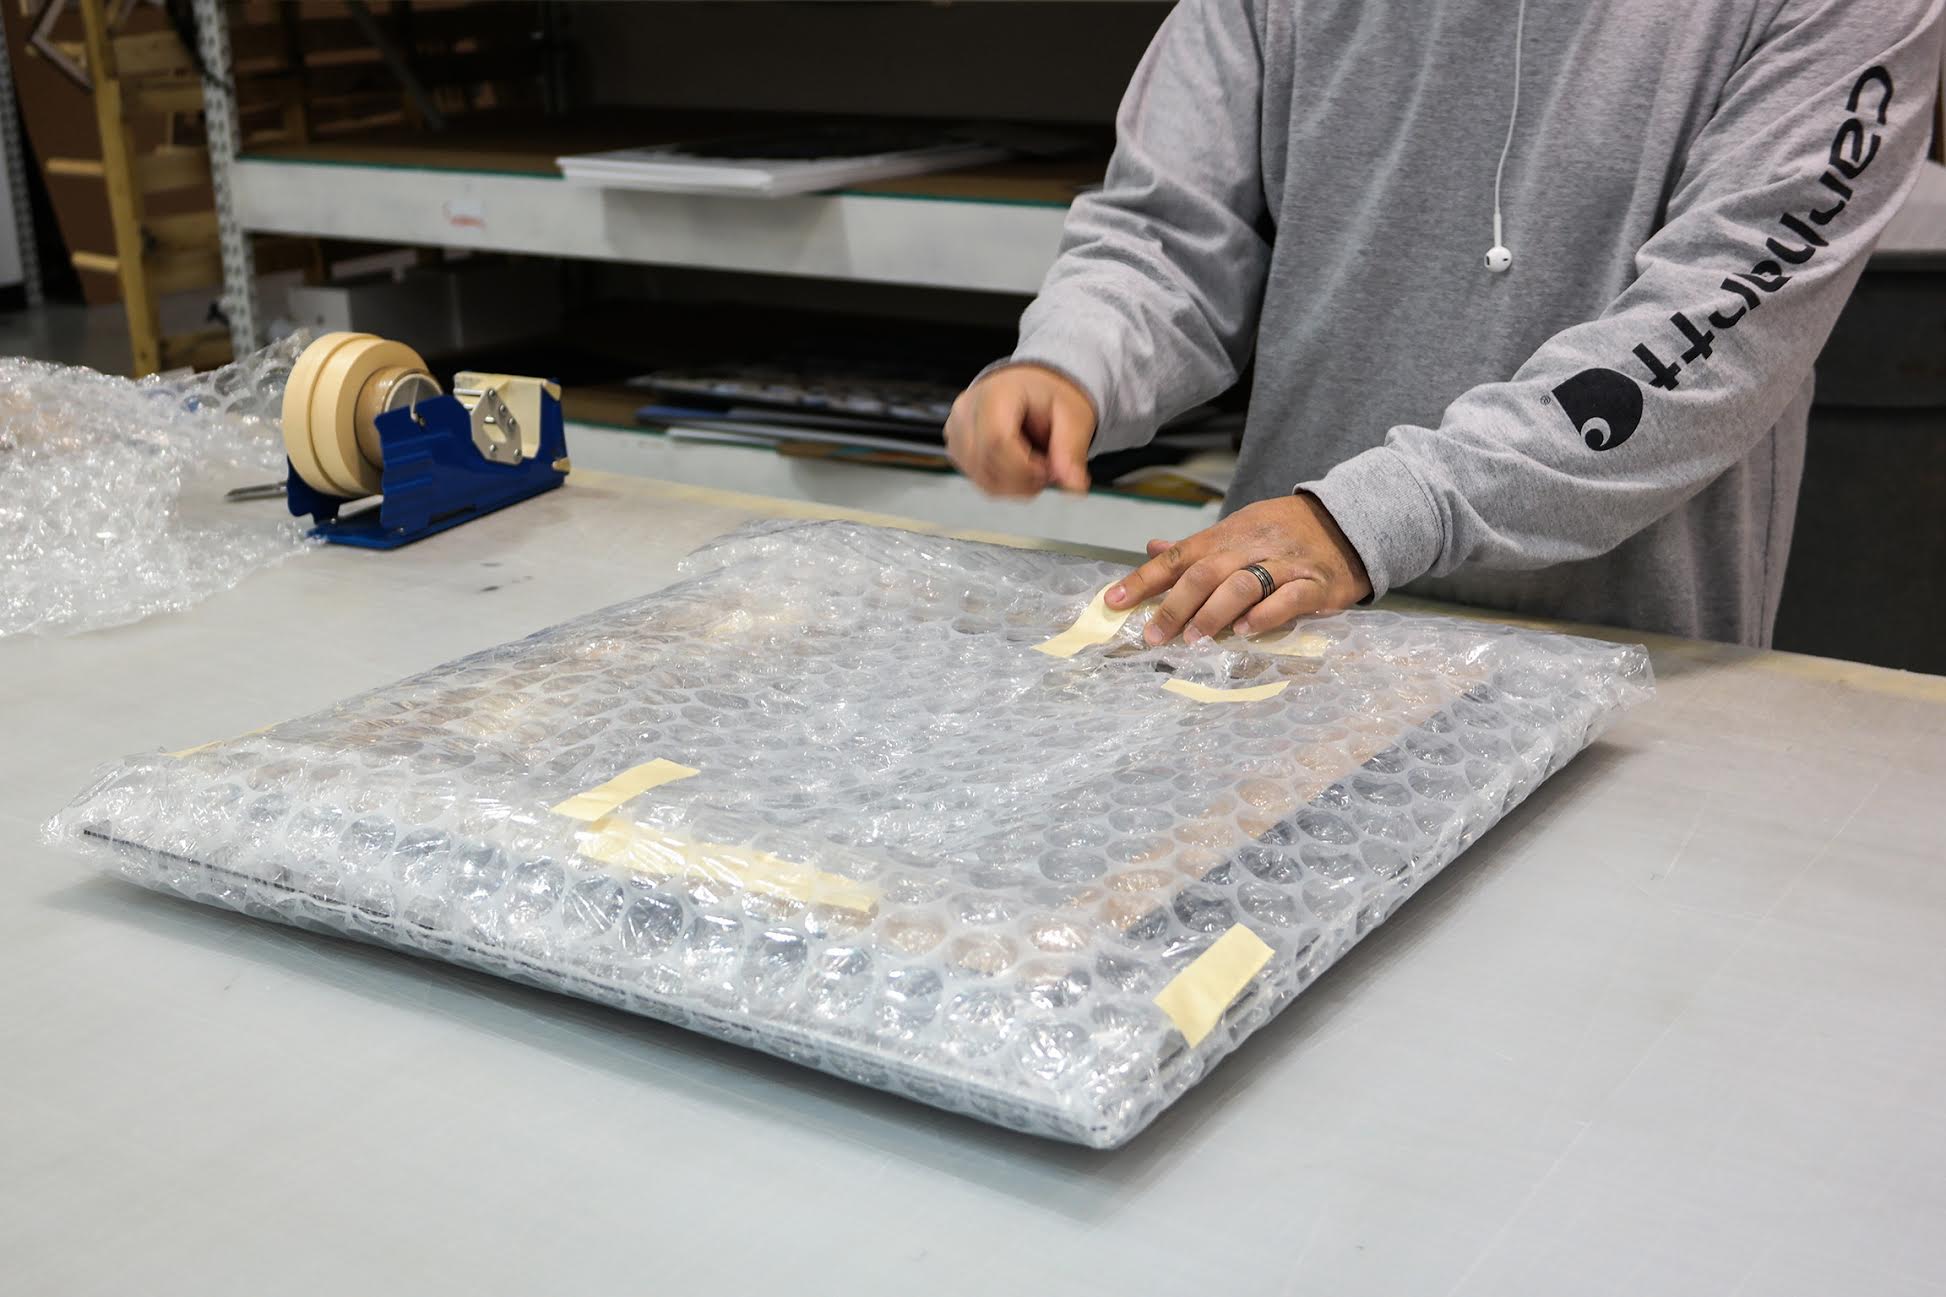 Even packaging is an important step in ArtisanHD's quality control measures